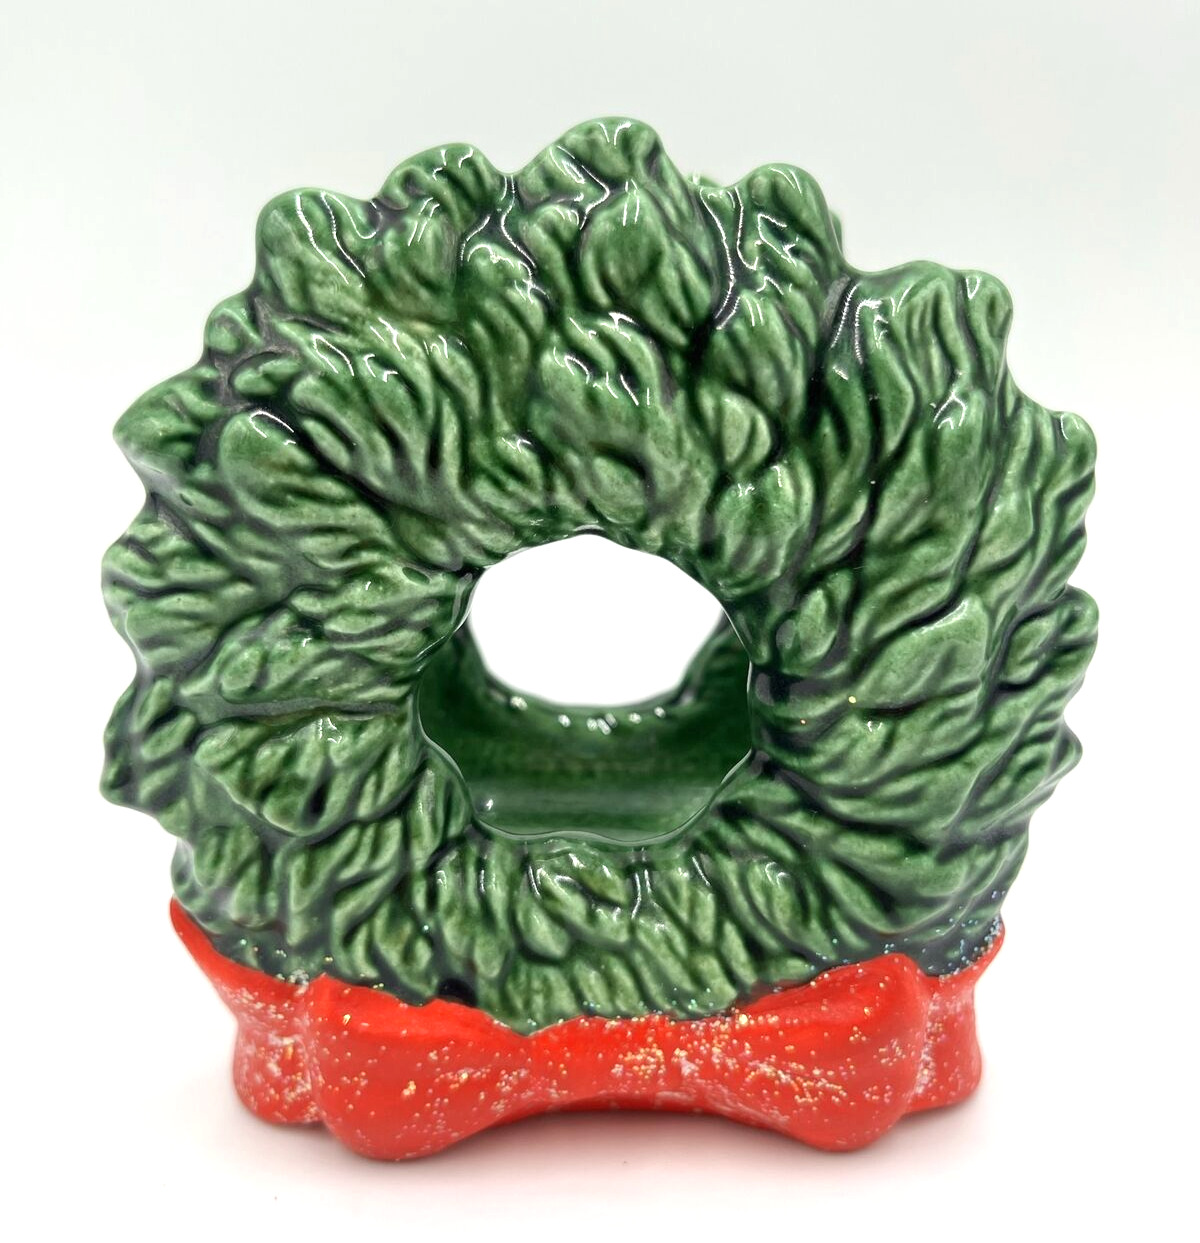 Vintage Ceramic Christmas Green Wreath With Red Bow Napkin Holder SIGNED 5”